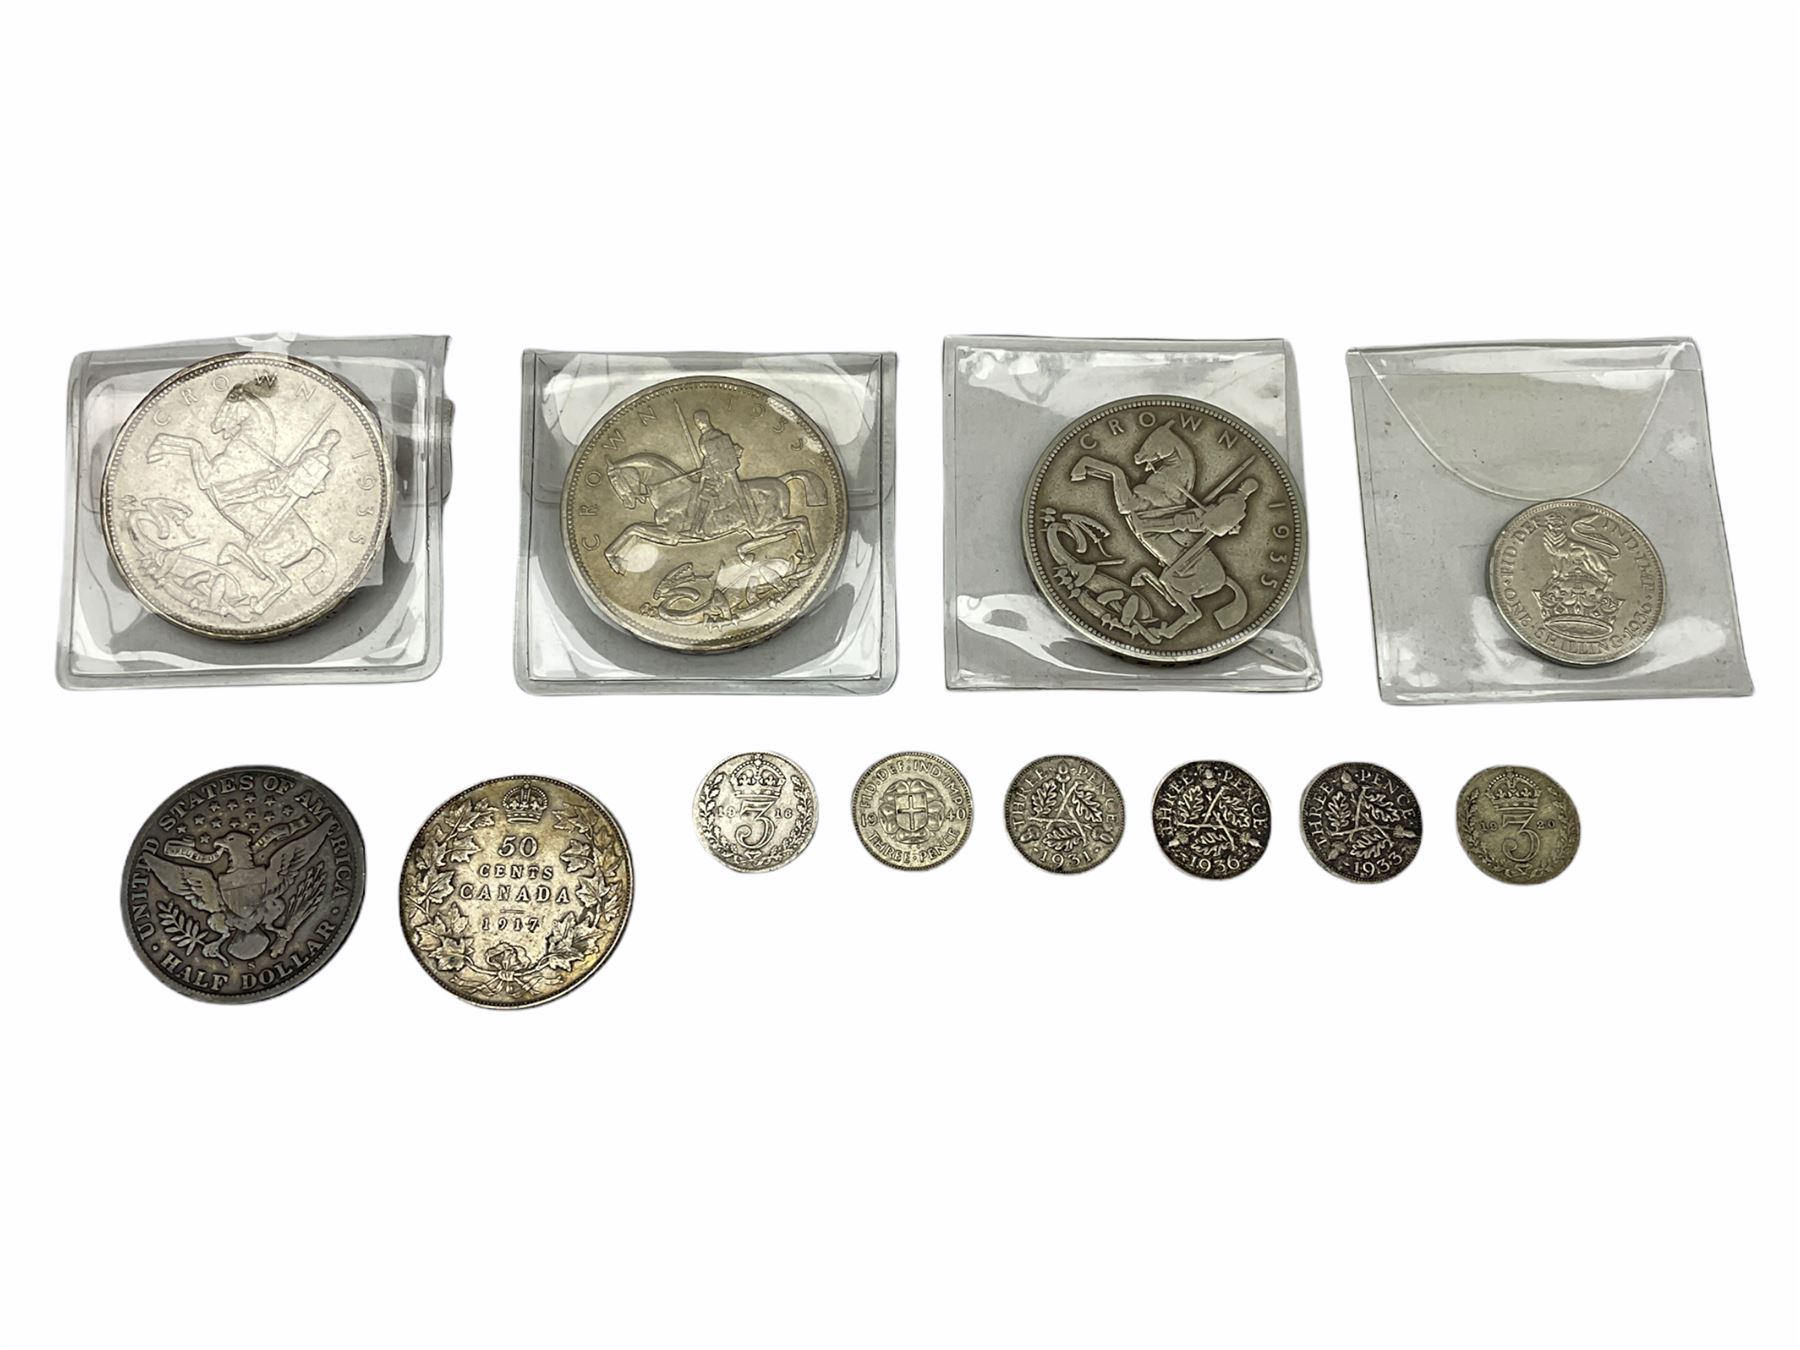 Three King George V 1935 Great British crowns - Image 2 of 2